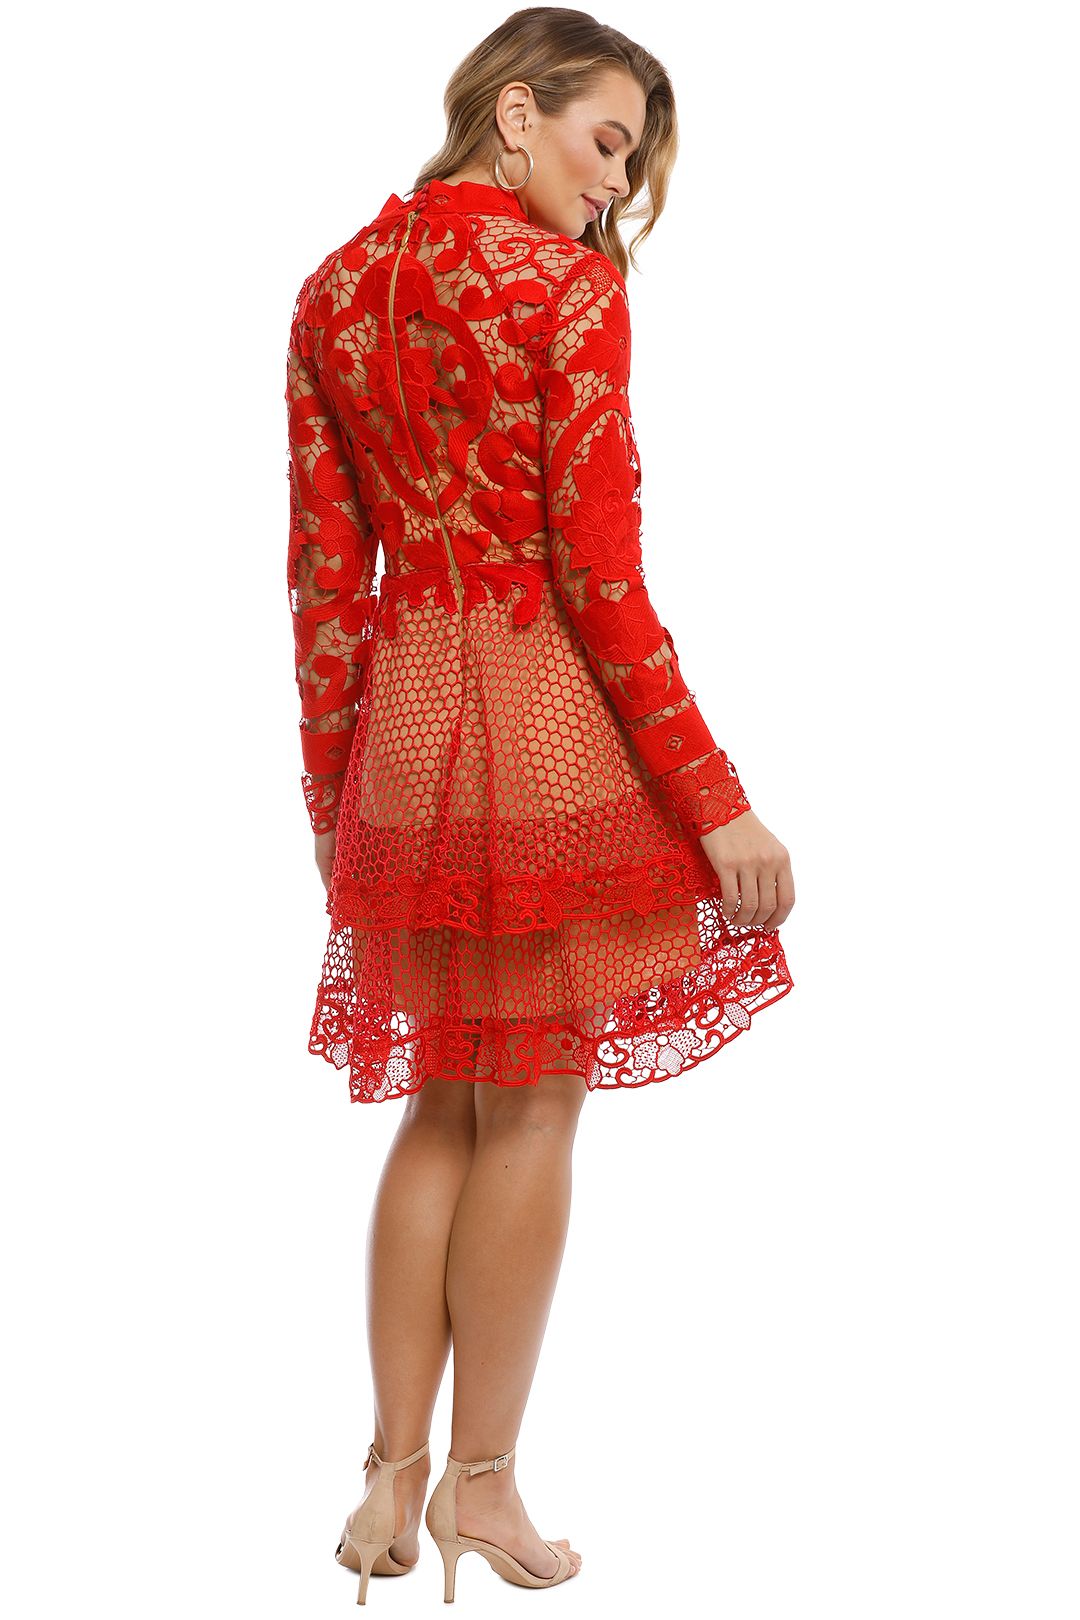 Thurley - Rose Ceremony Mini Dress - Red - back